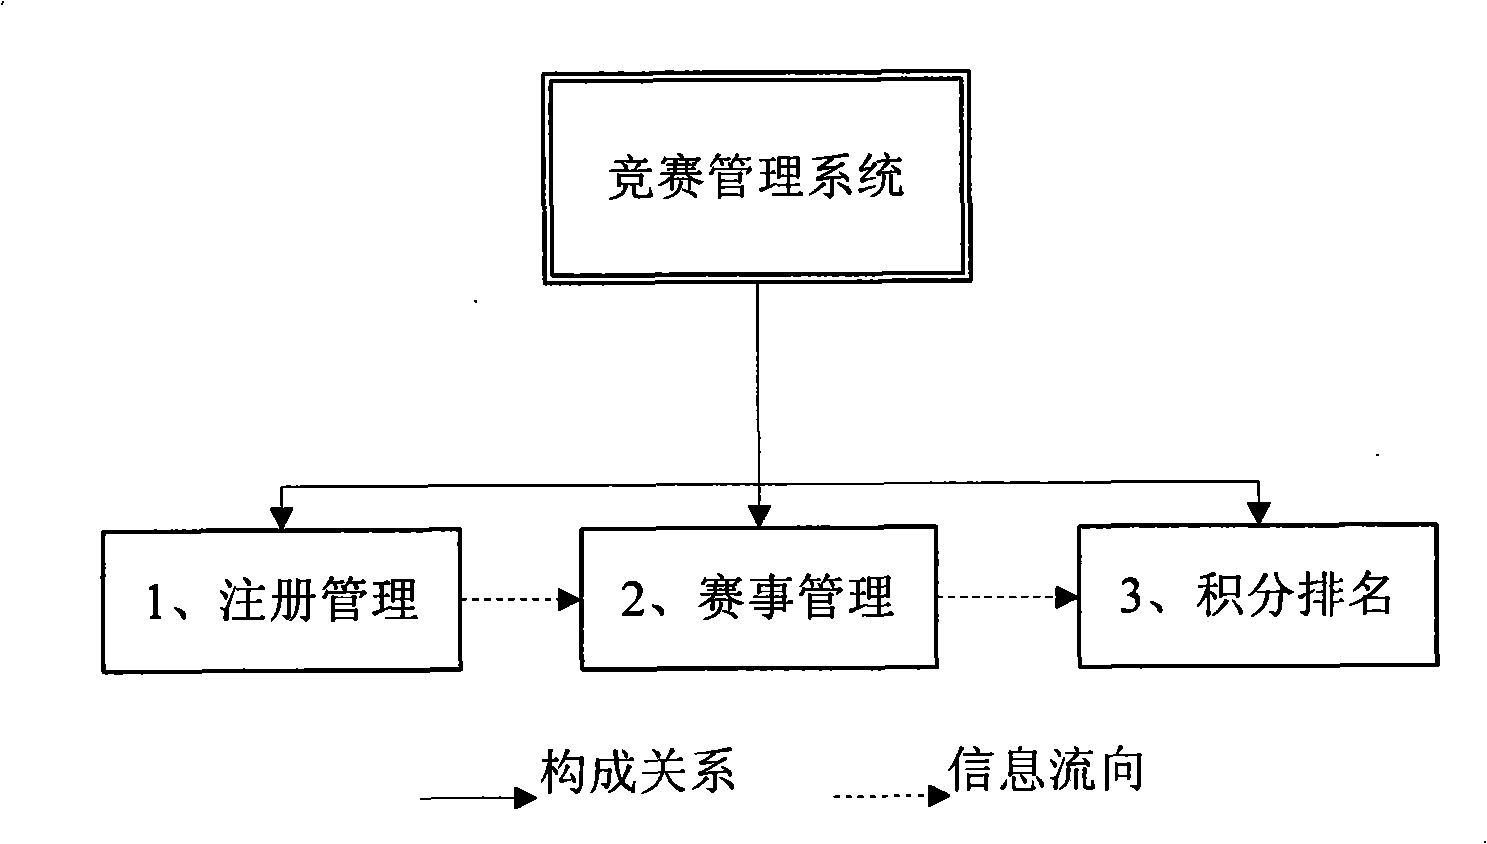 Competition management system and method based on network